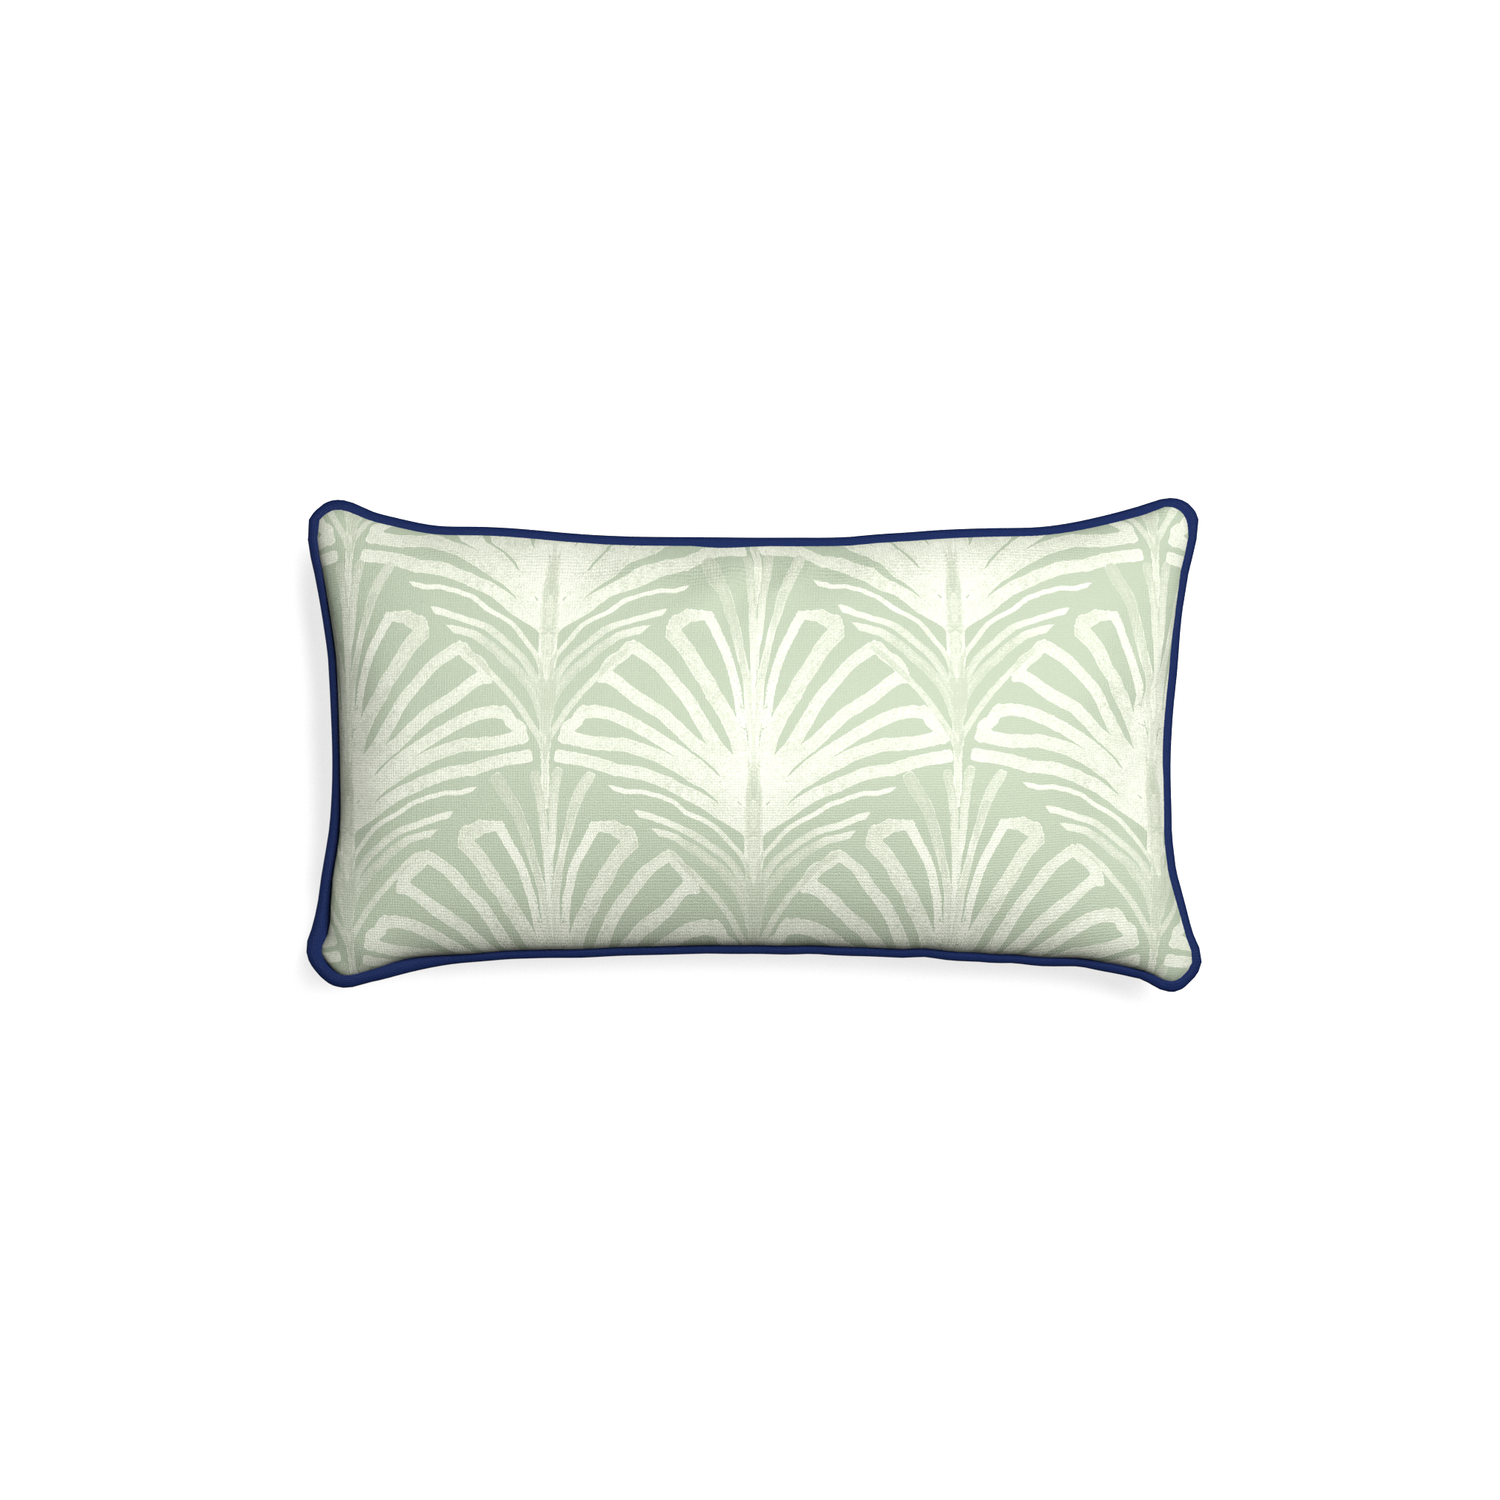 Petite-lumbar suzy sage custom sage green palmpillow with midnight piping on white background